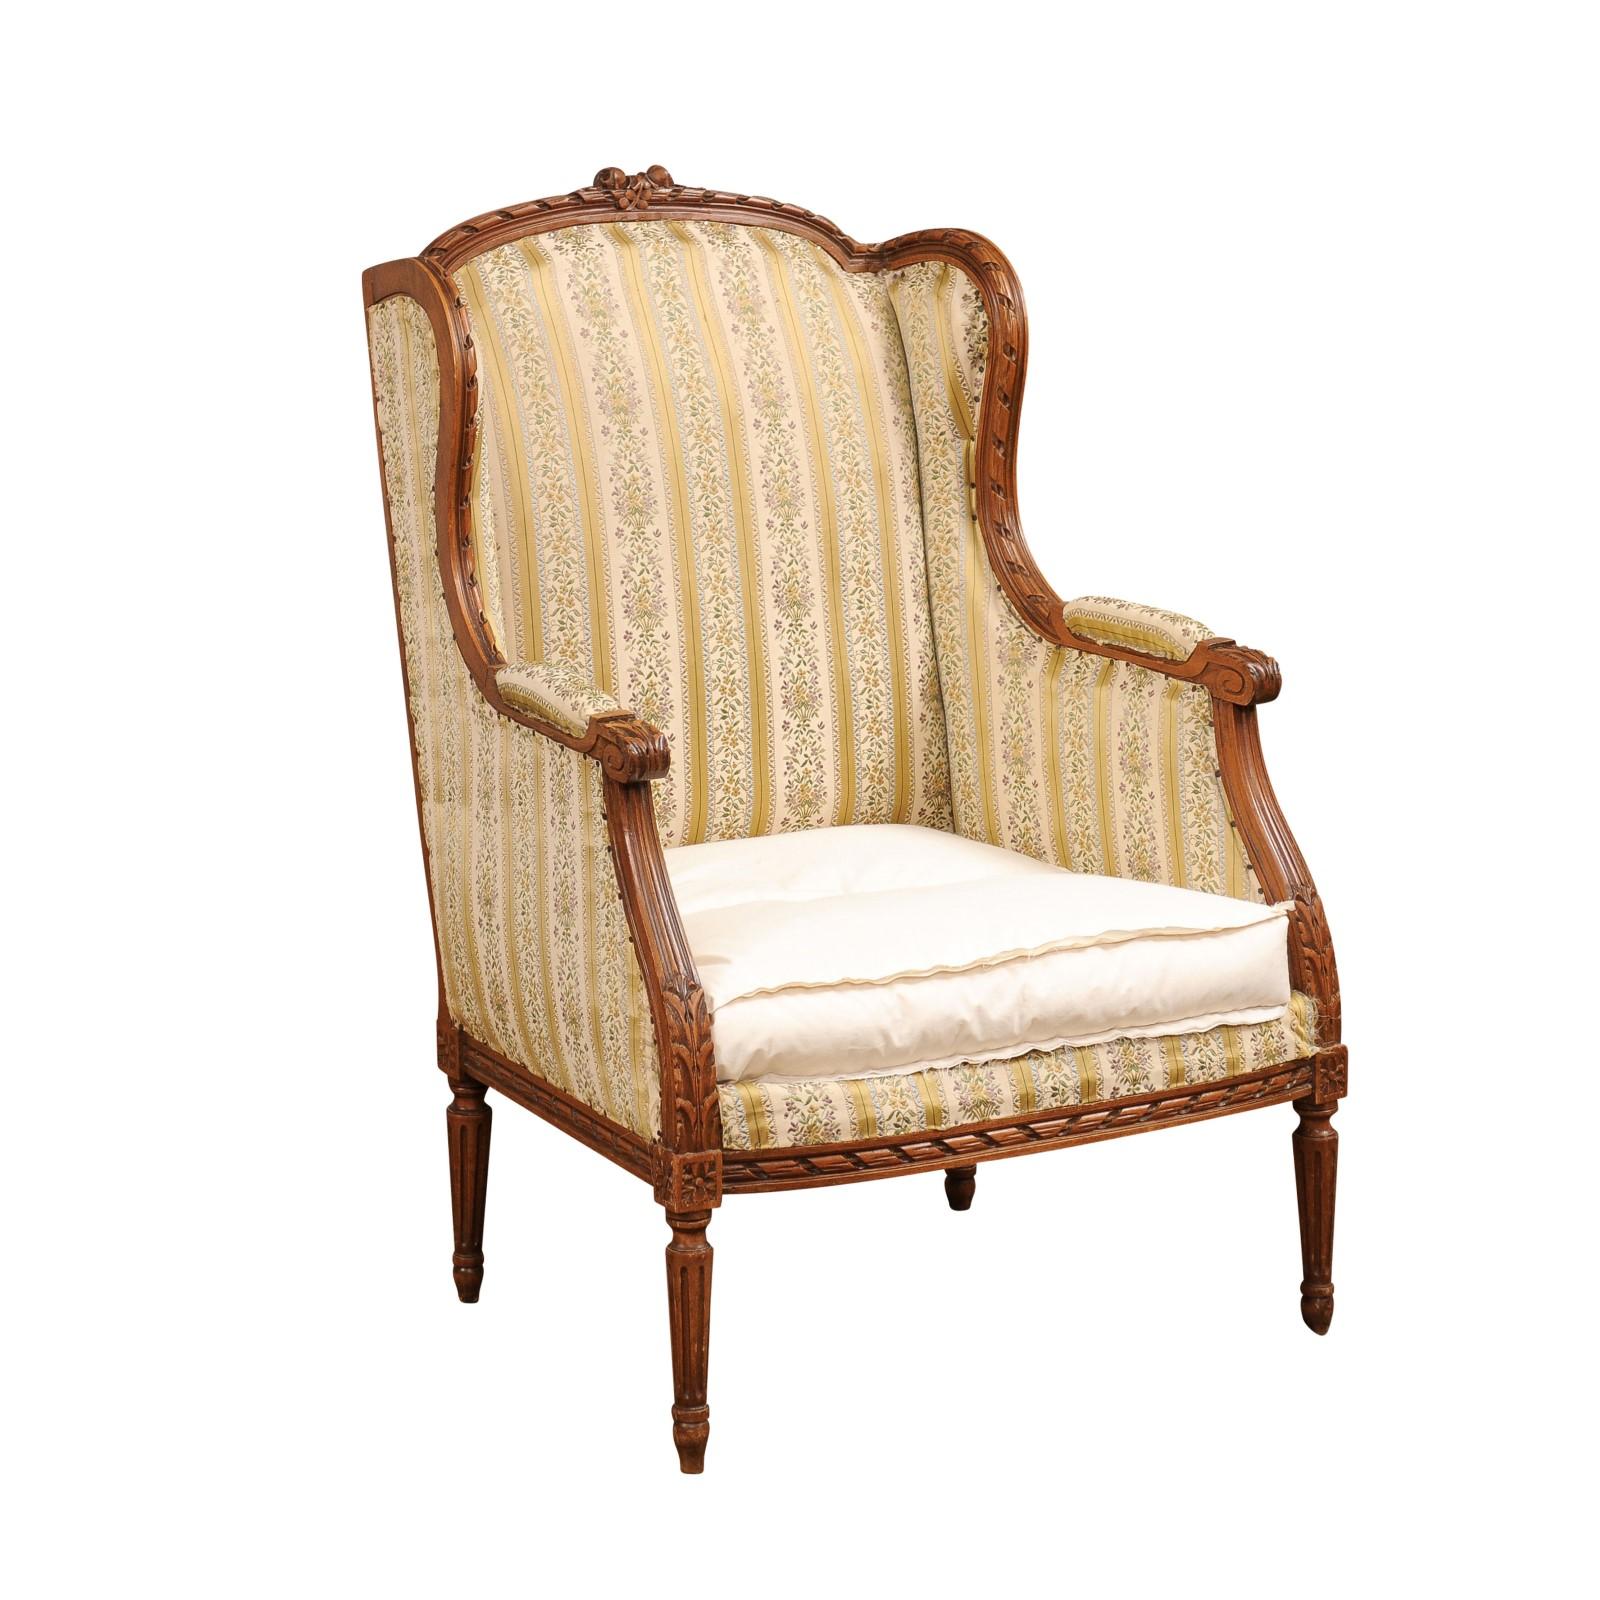 A French Louis XVI style walnut bergère wingback armchair from the 19th century with carved twisted ribbon, roses and foliage motifs. This French Louis XVI style walnut bergère wingback armchair, hailing from the 19th century, is a true testament to